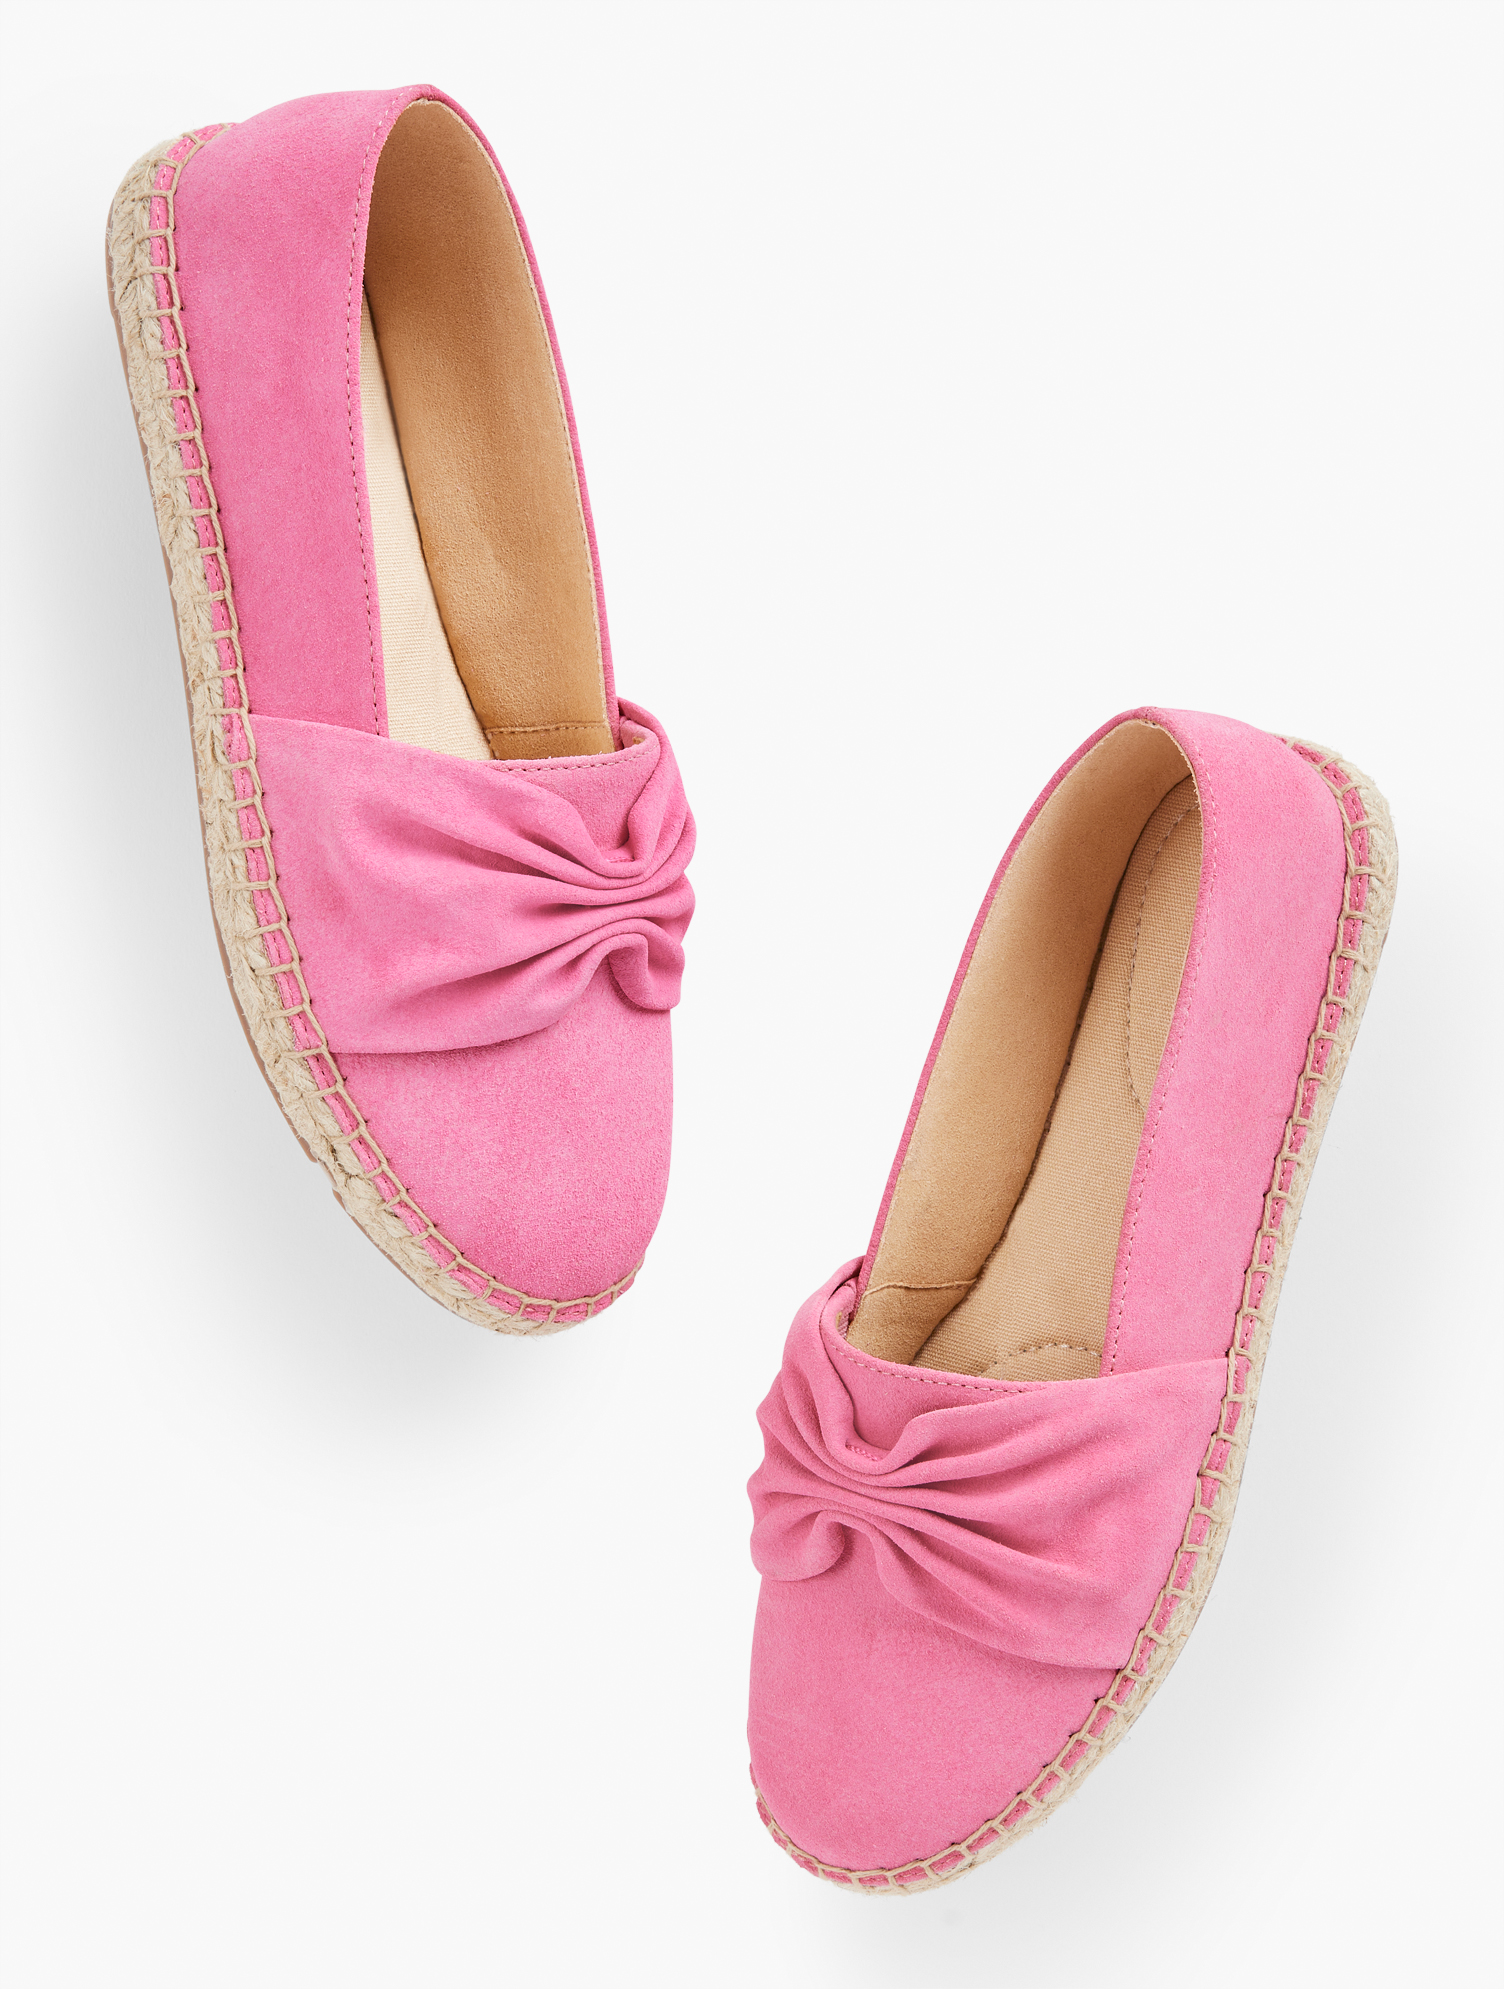 Talbots Izzy Cinched Suede Espadrilles - Hot Pink - 10m